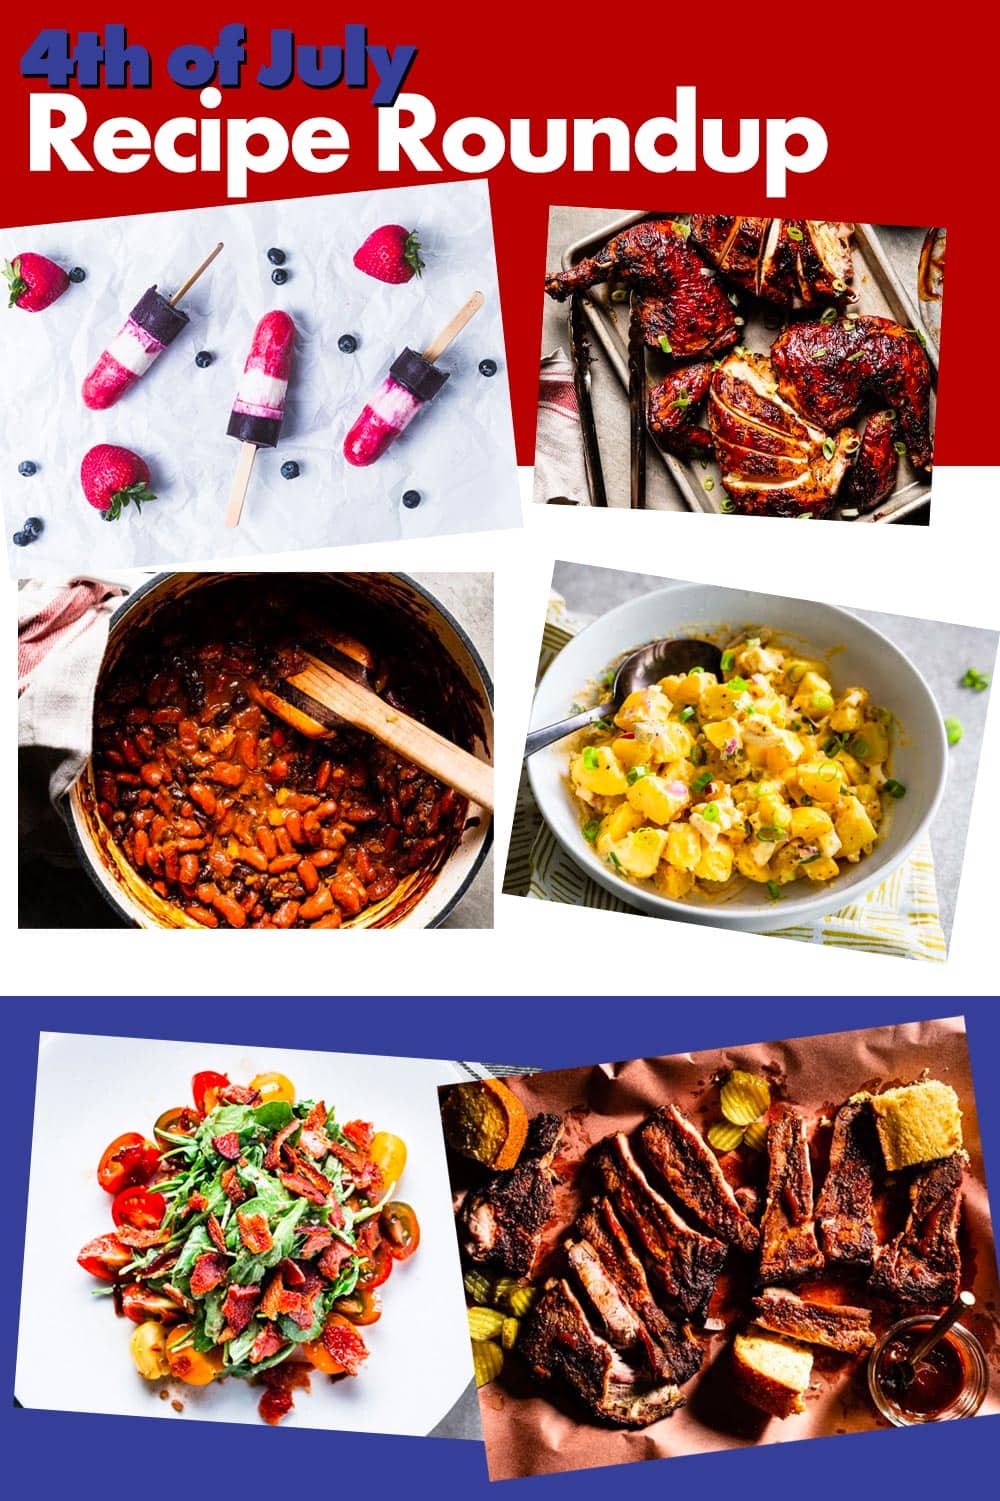 4th of july recipe roundup